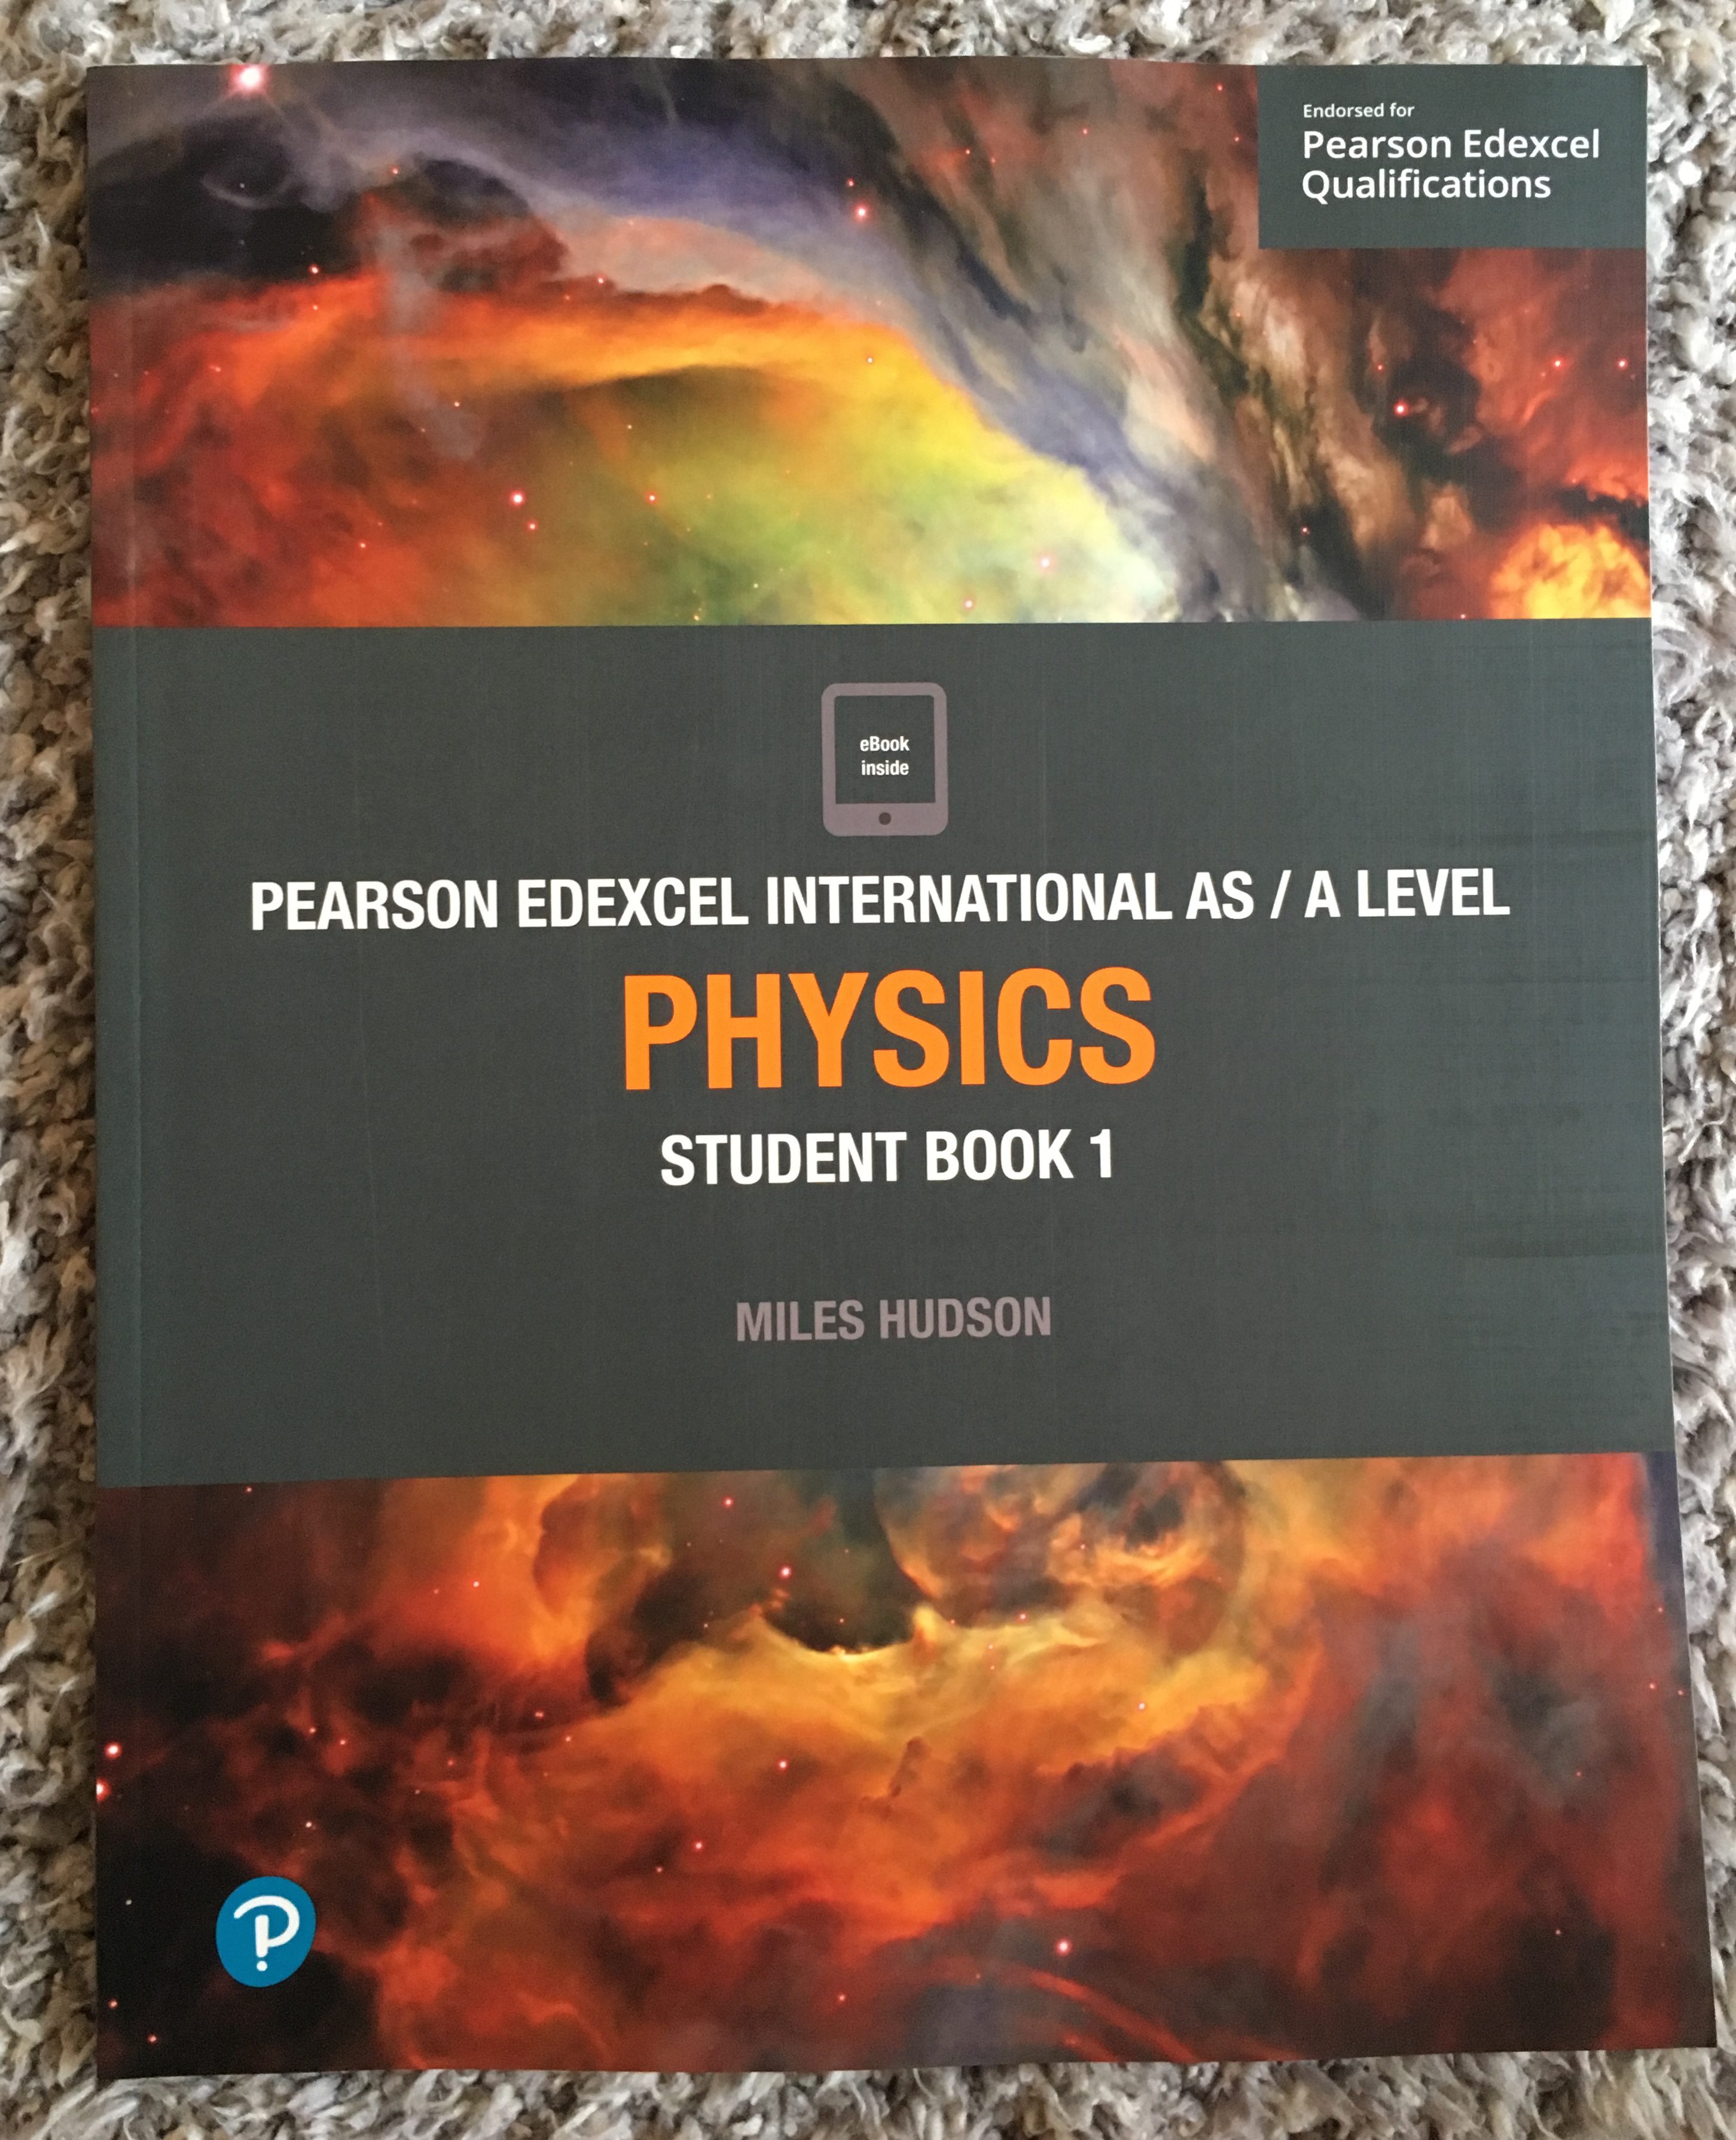 Edexcel IAL Physics Book1 by Miles Hudson cover image